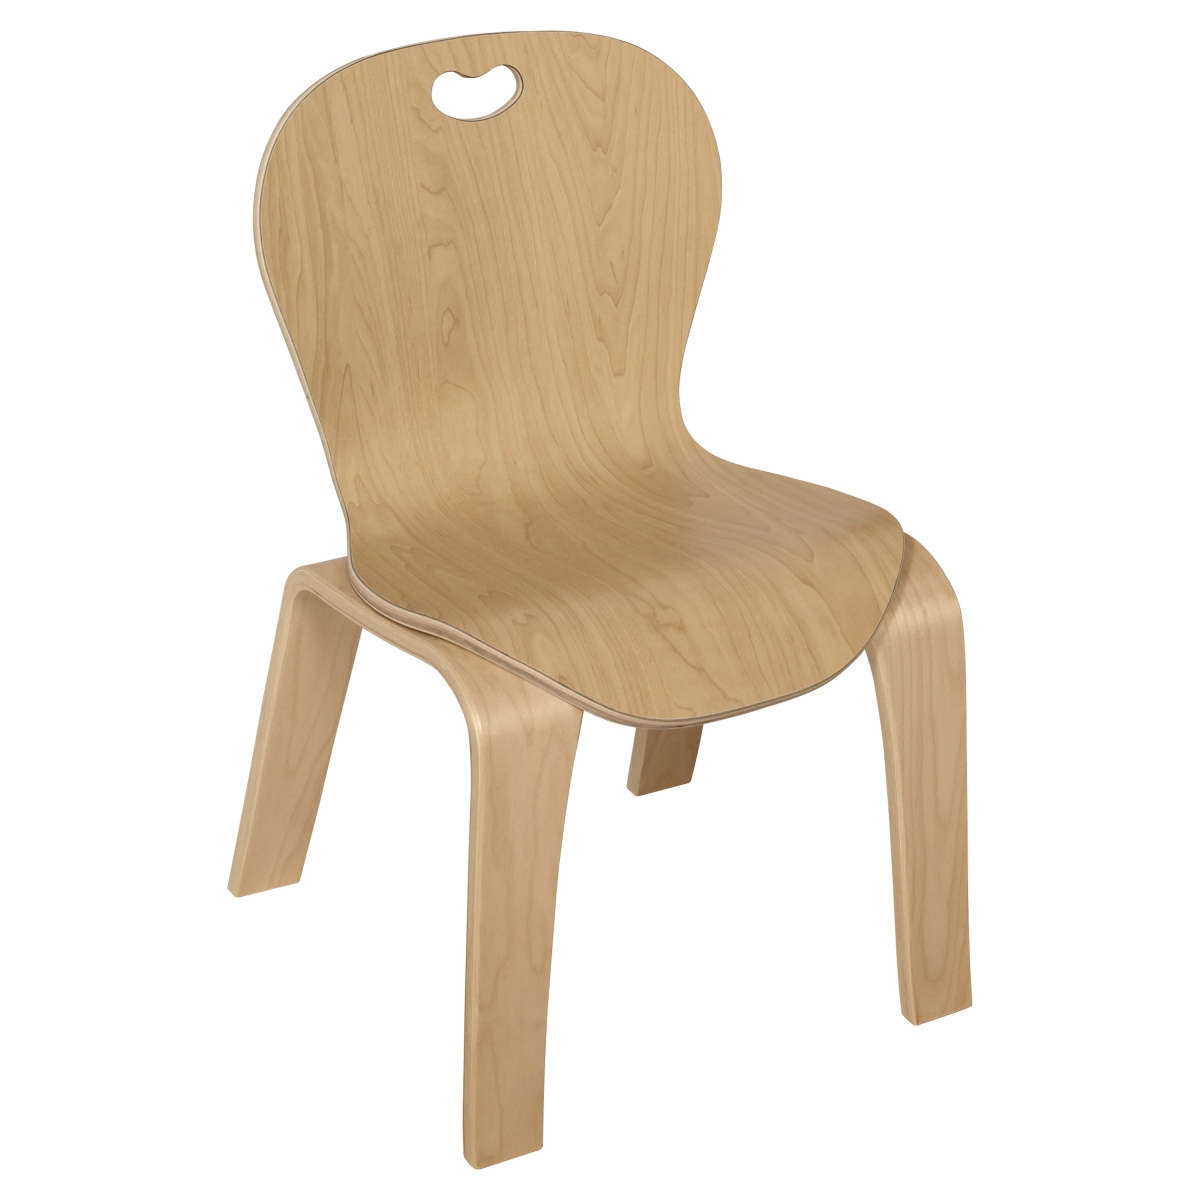 Mh881601 16 In. Bentwood Kids Chair